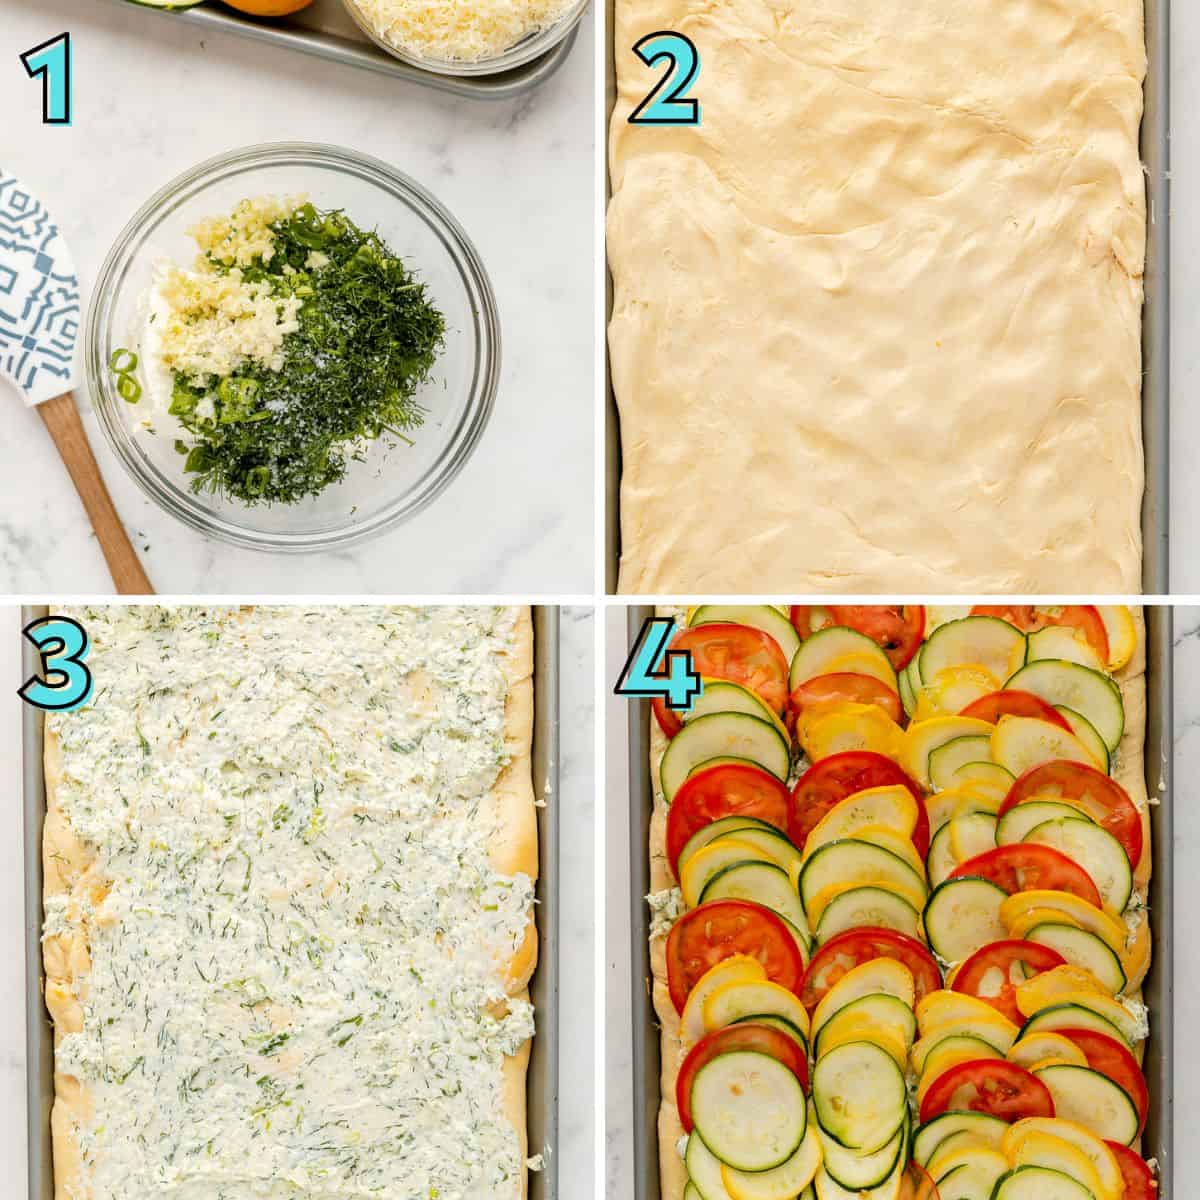 Step by step recipe instructions in a numbered collage.